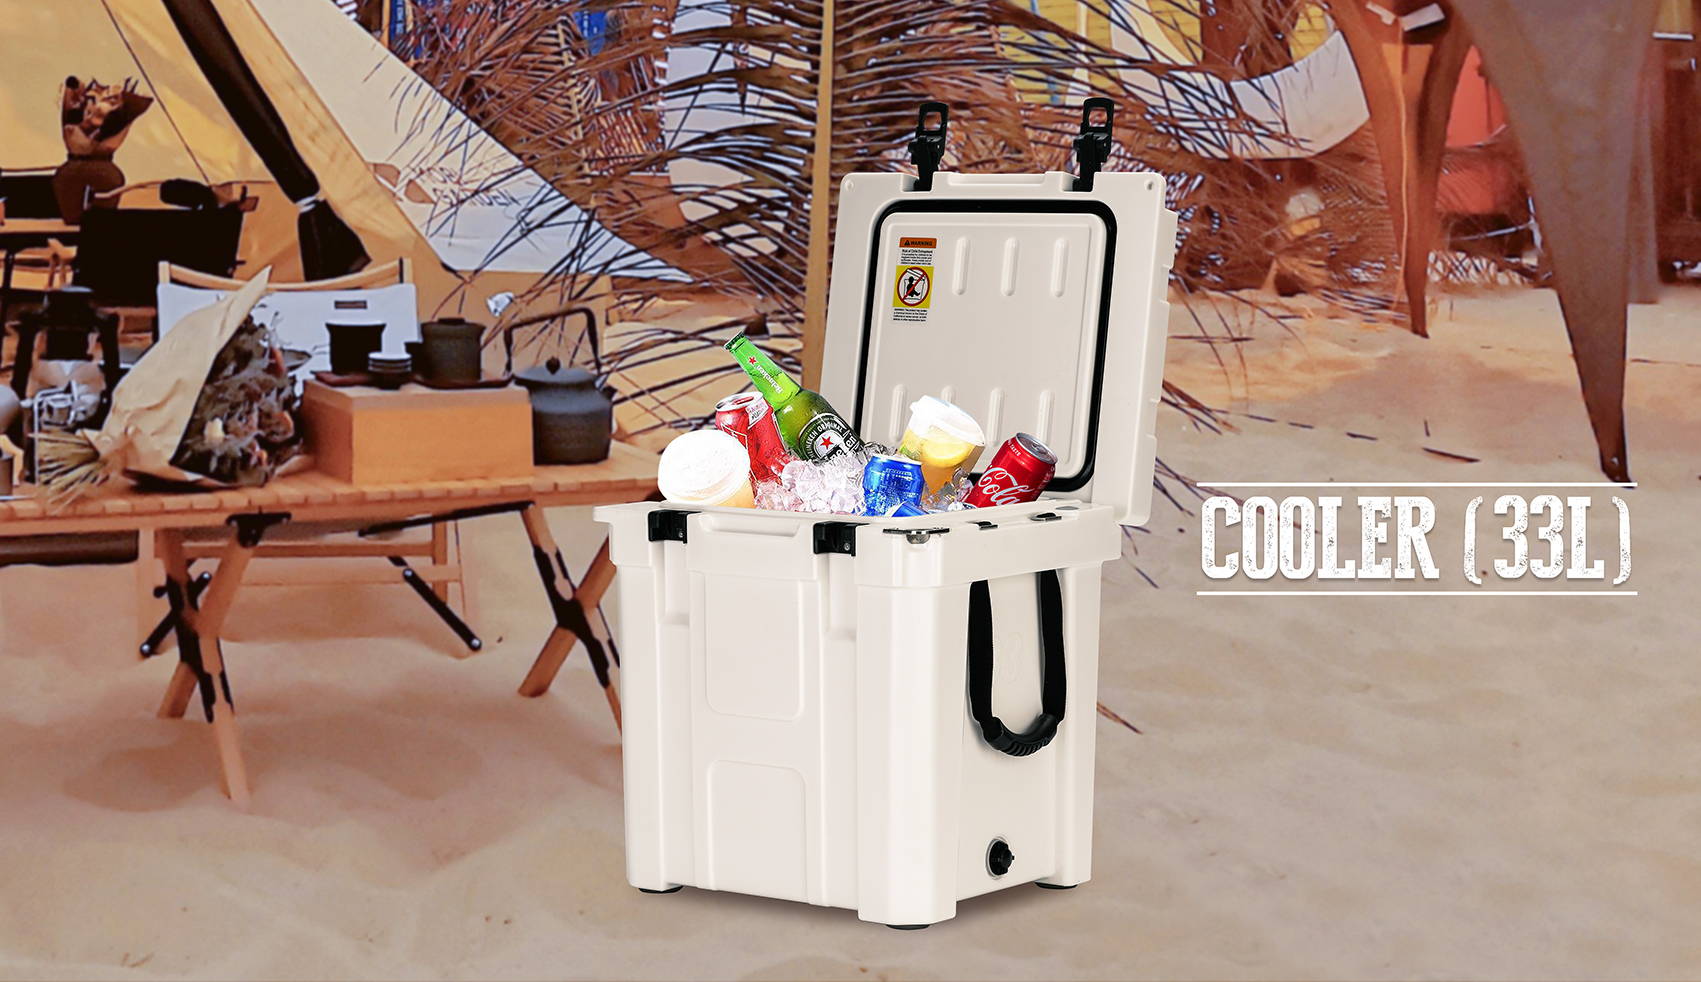 When camping, the white 33-liter cooler contains a lot of drinks